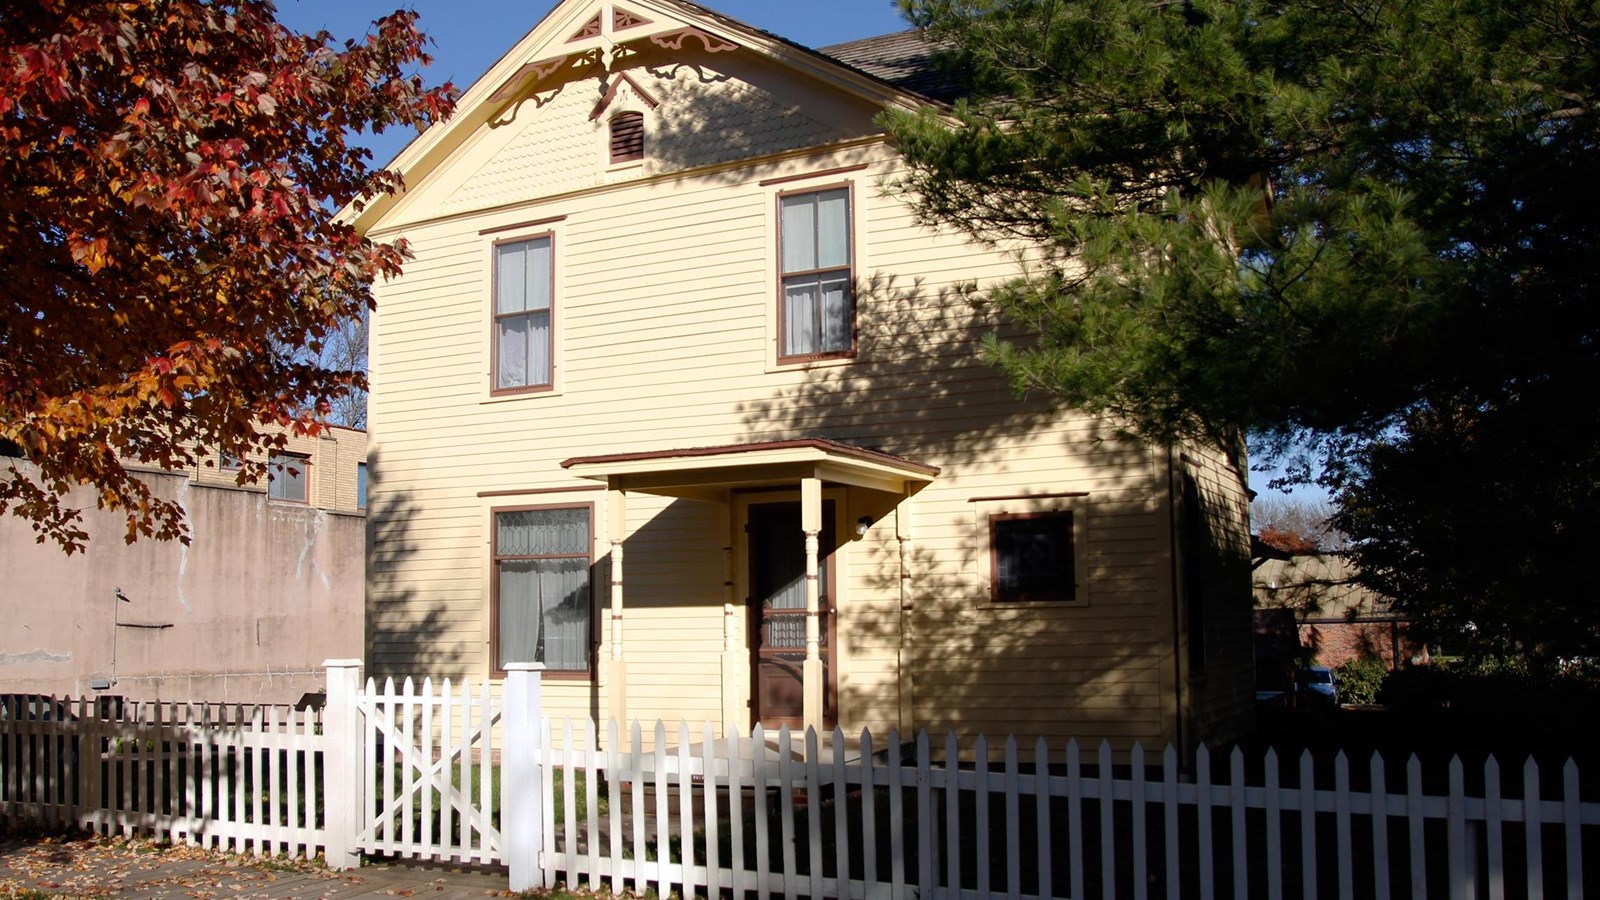 A yellow house with brown trim and a covered front porch is partially shaded by trees.